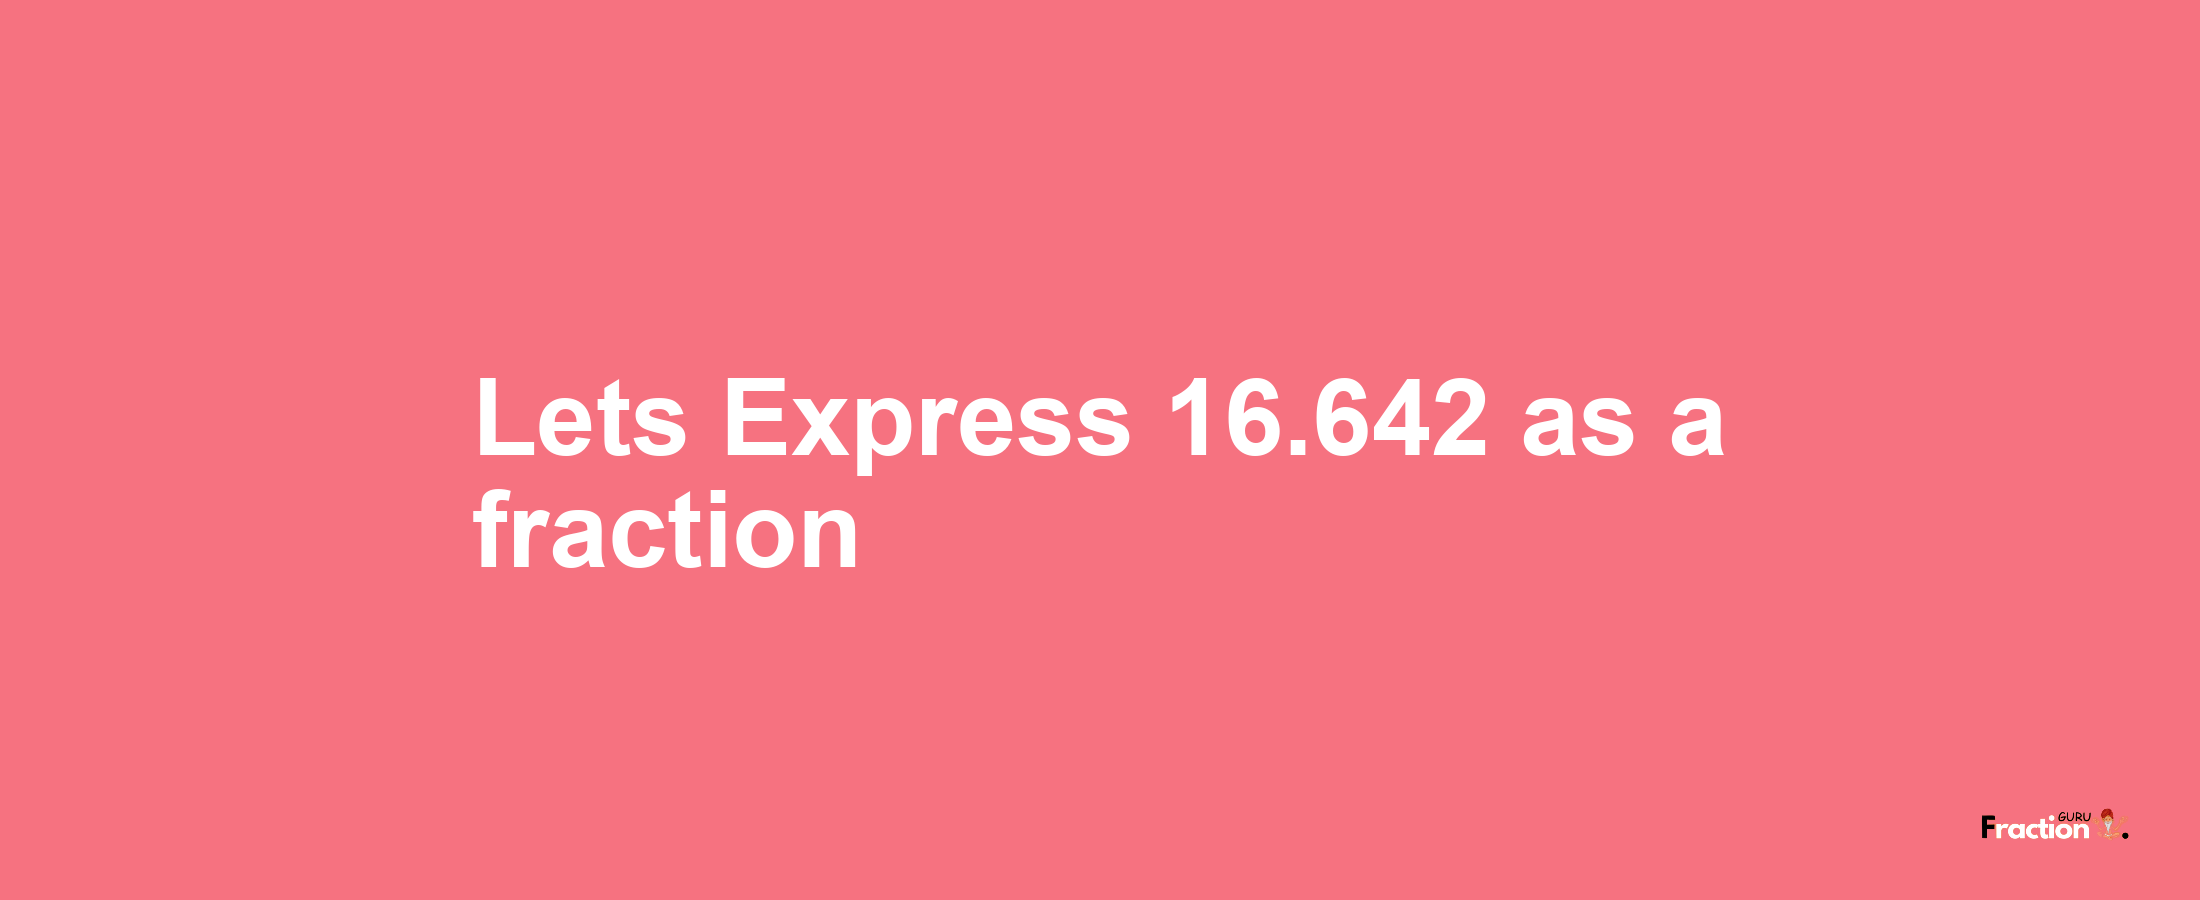 Lets Express 16.642 as afraction